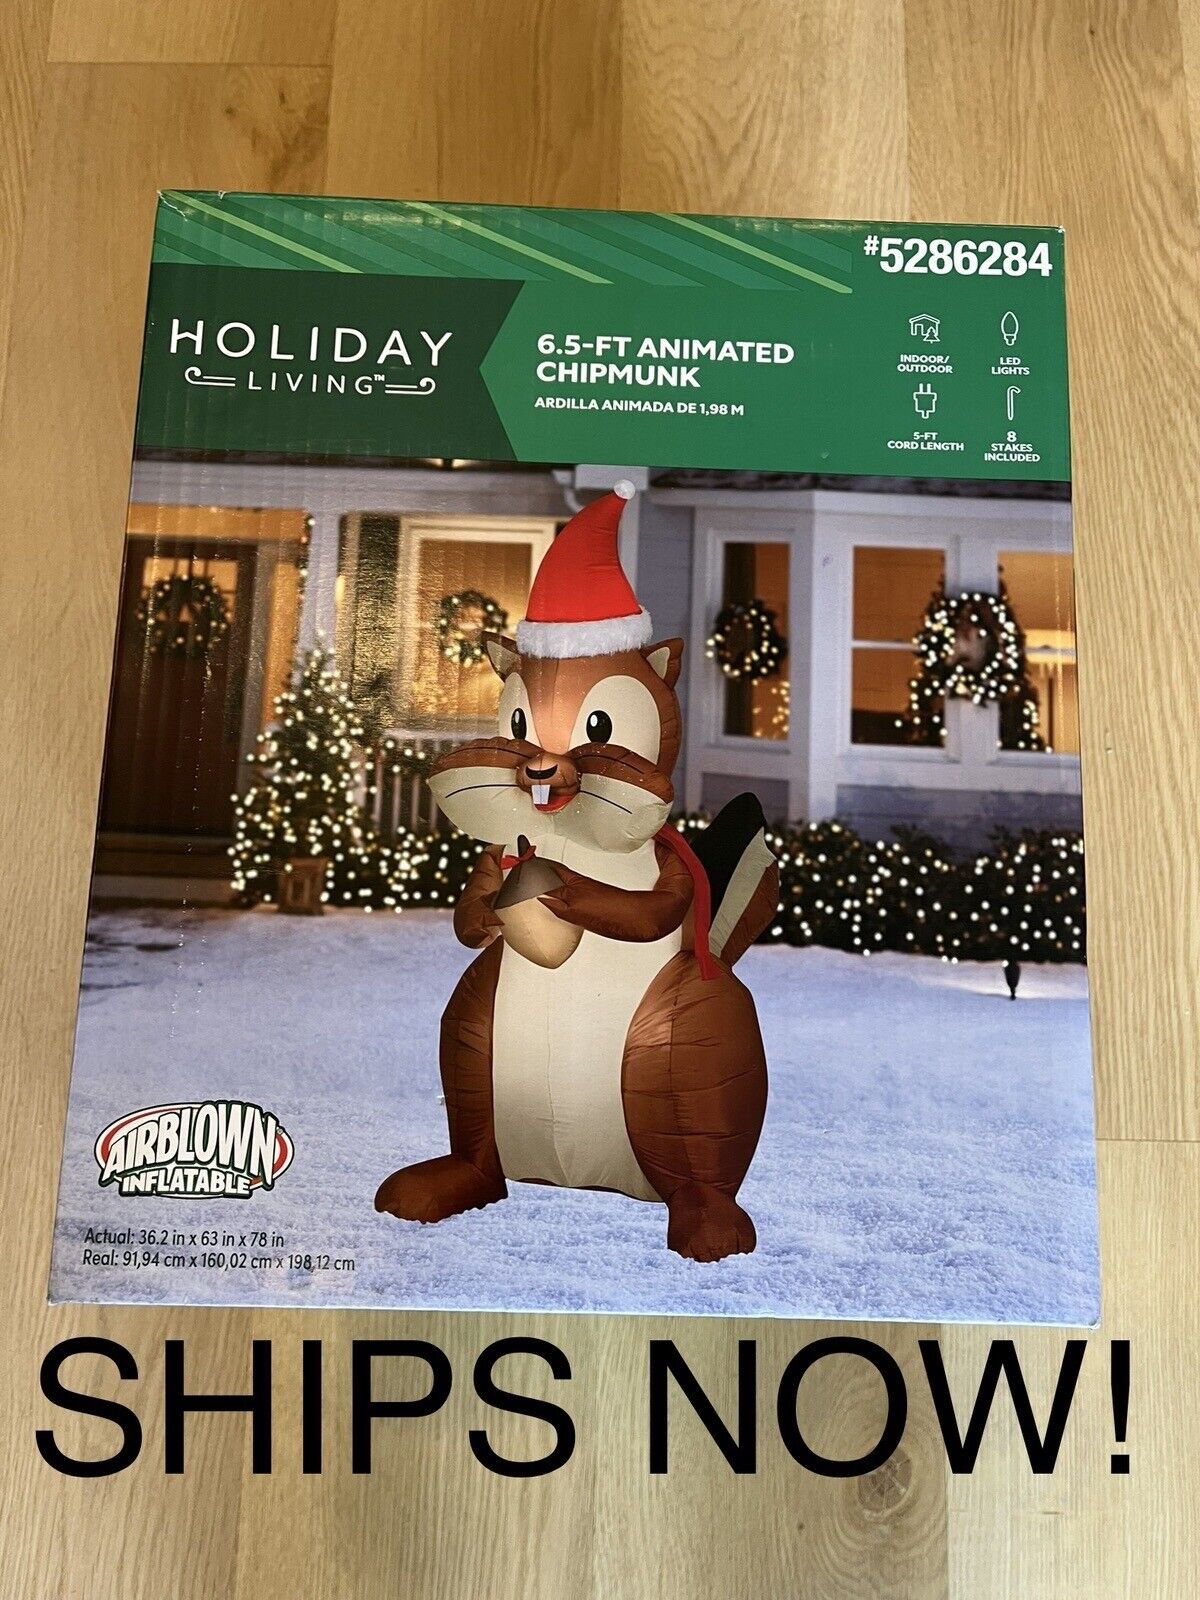 BRAND NEW 6.5 ft. Animated Inflatable Chipmunk w/ Acorn Christmas Decoration